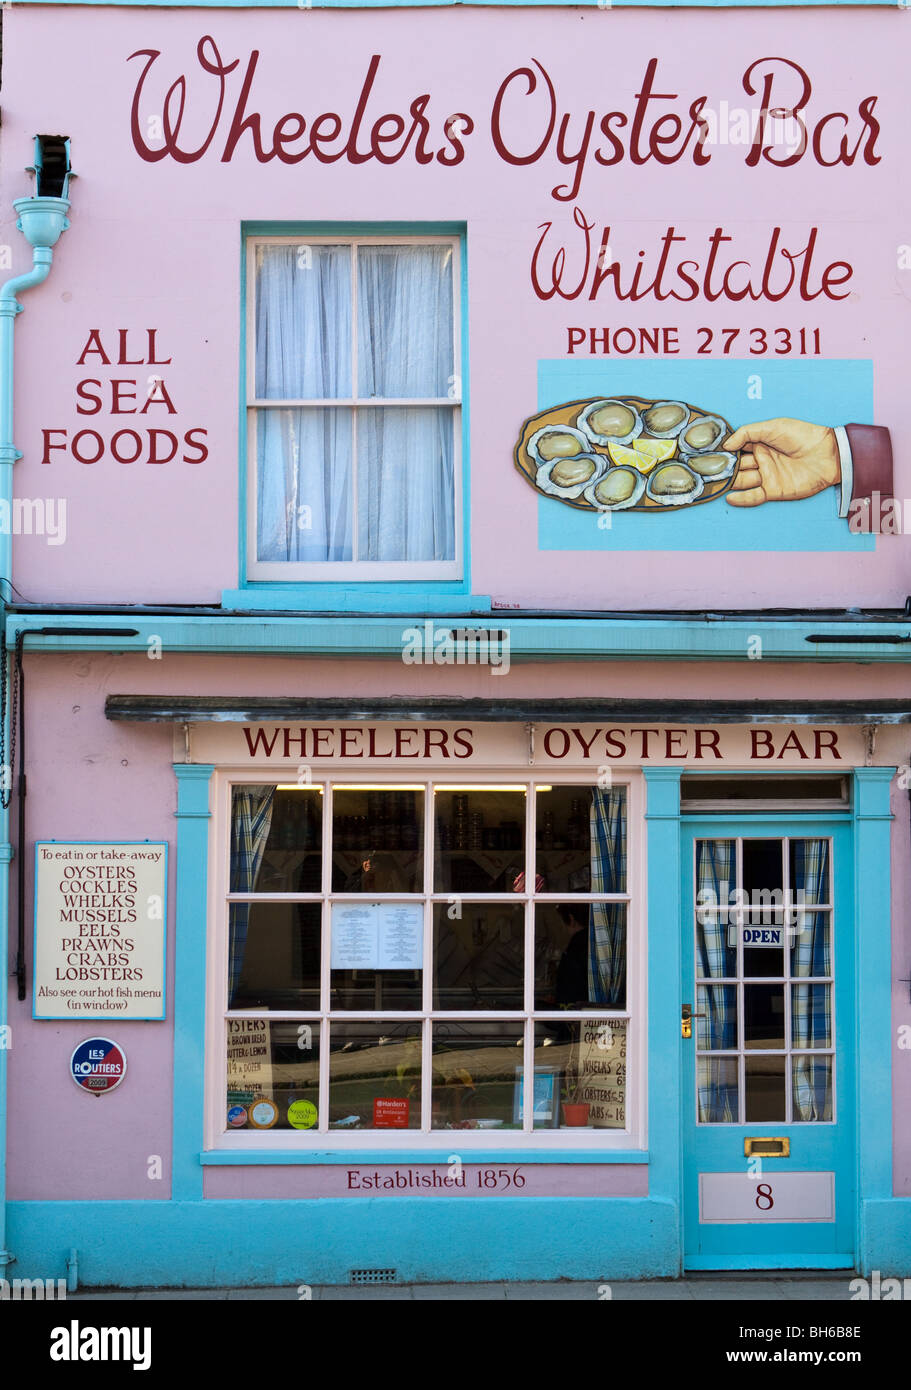 Wheelers Oyster Bar Whitstable Foto Stock